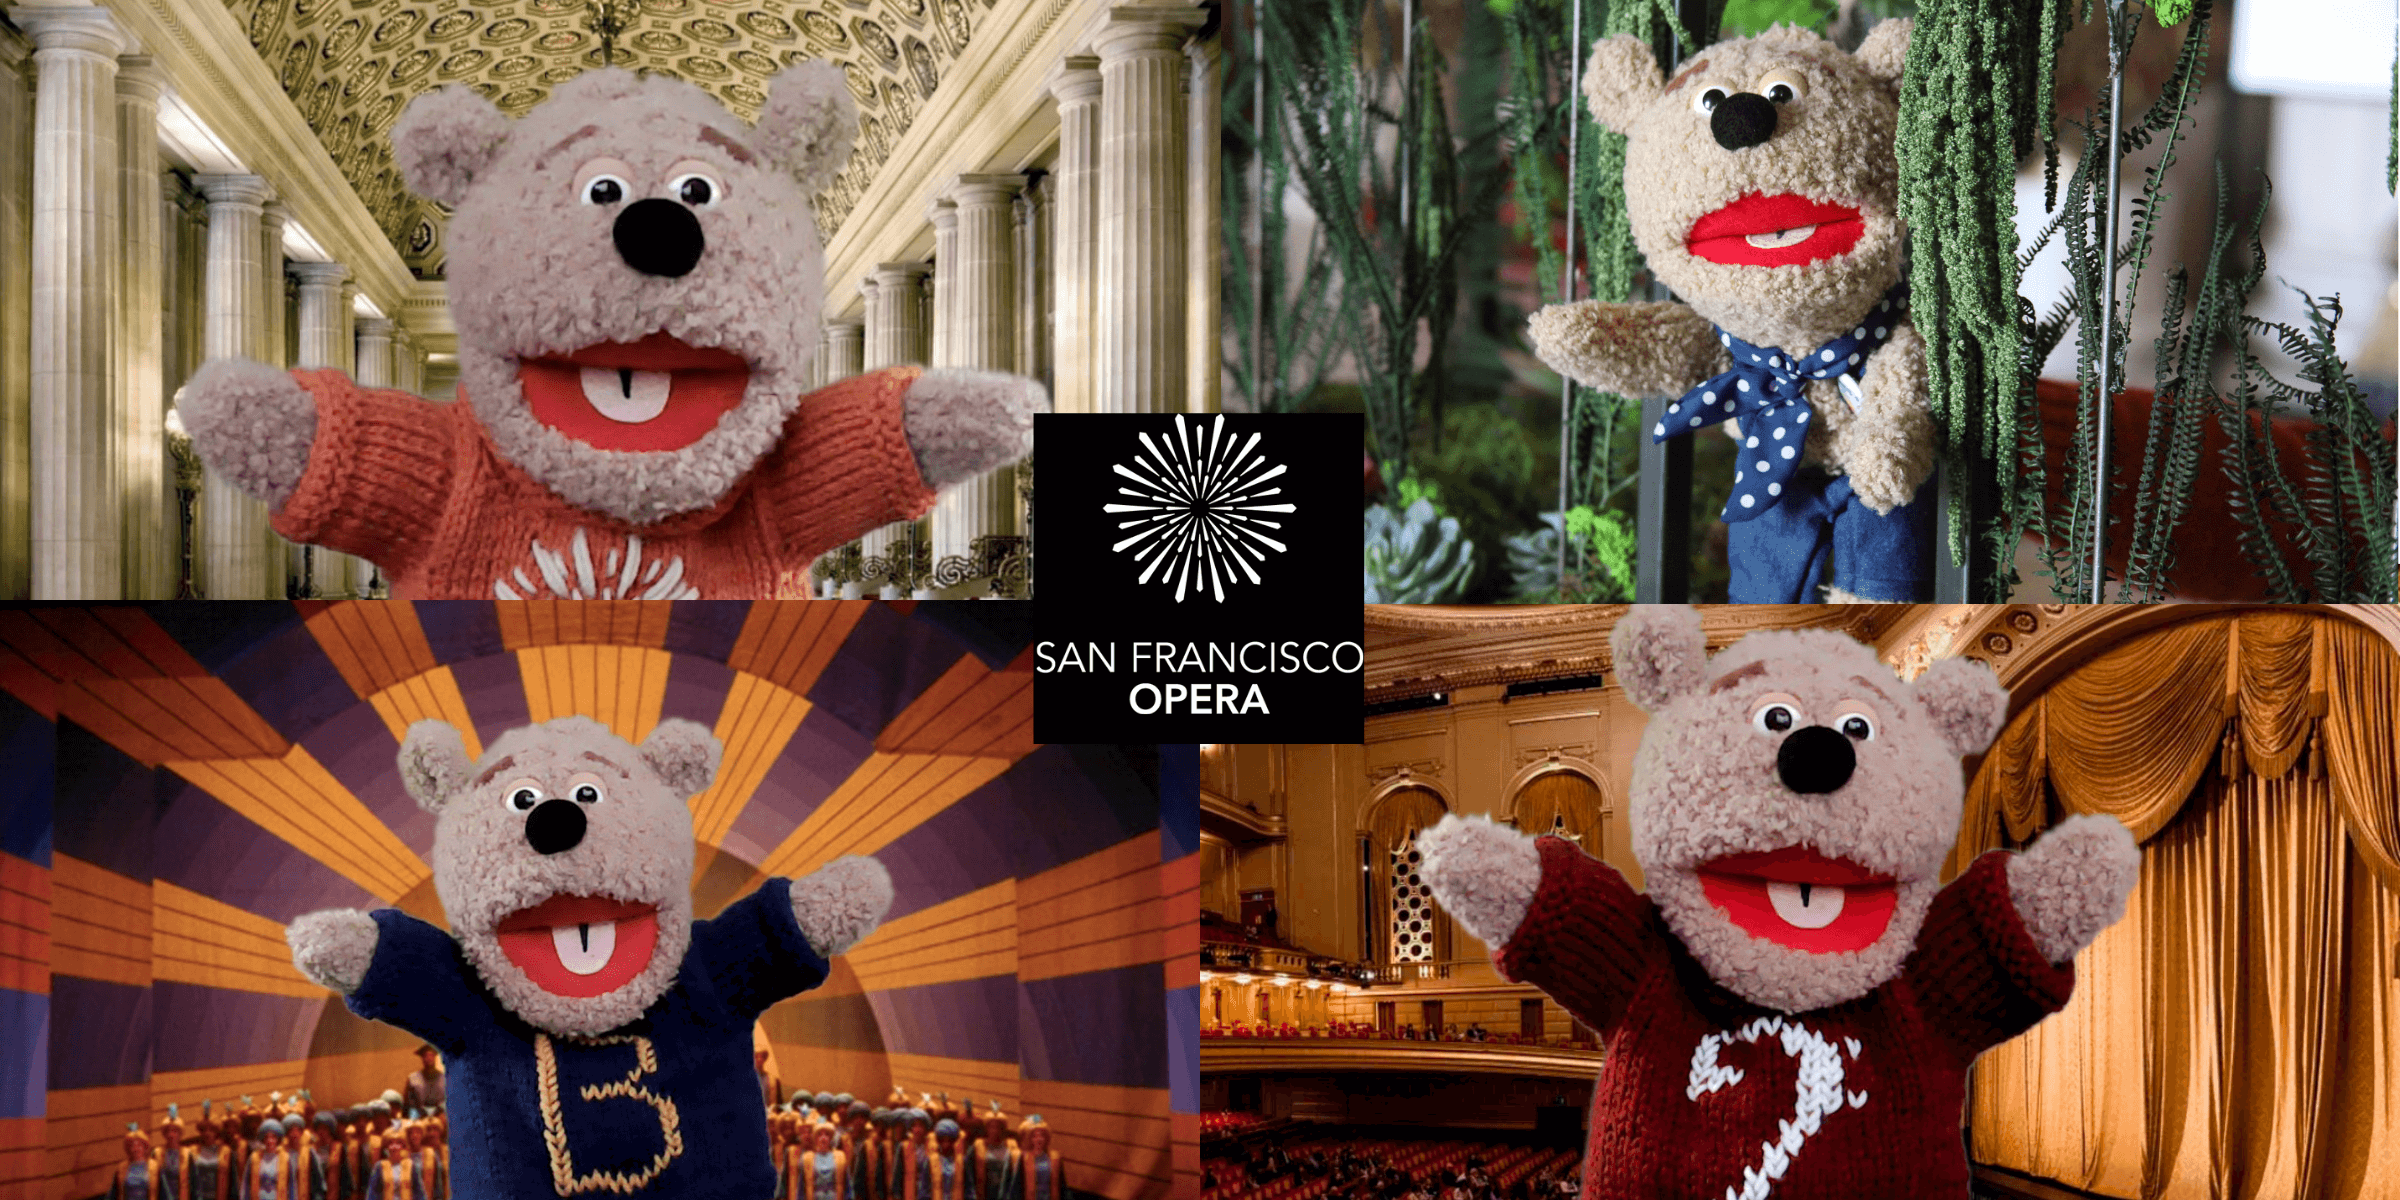 Four images of opera bear